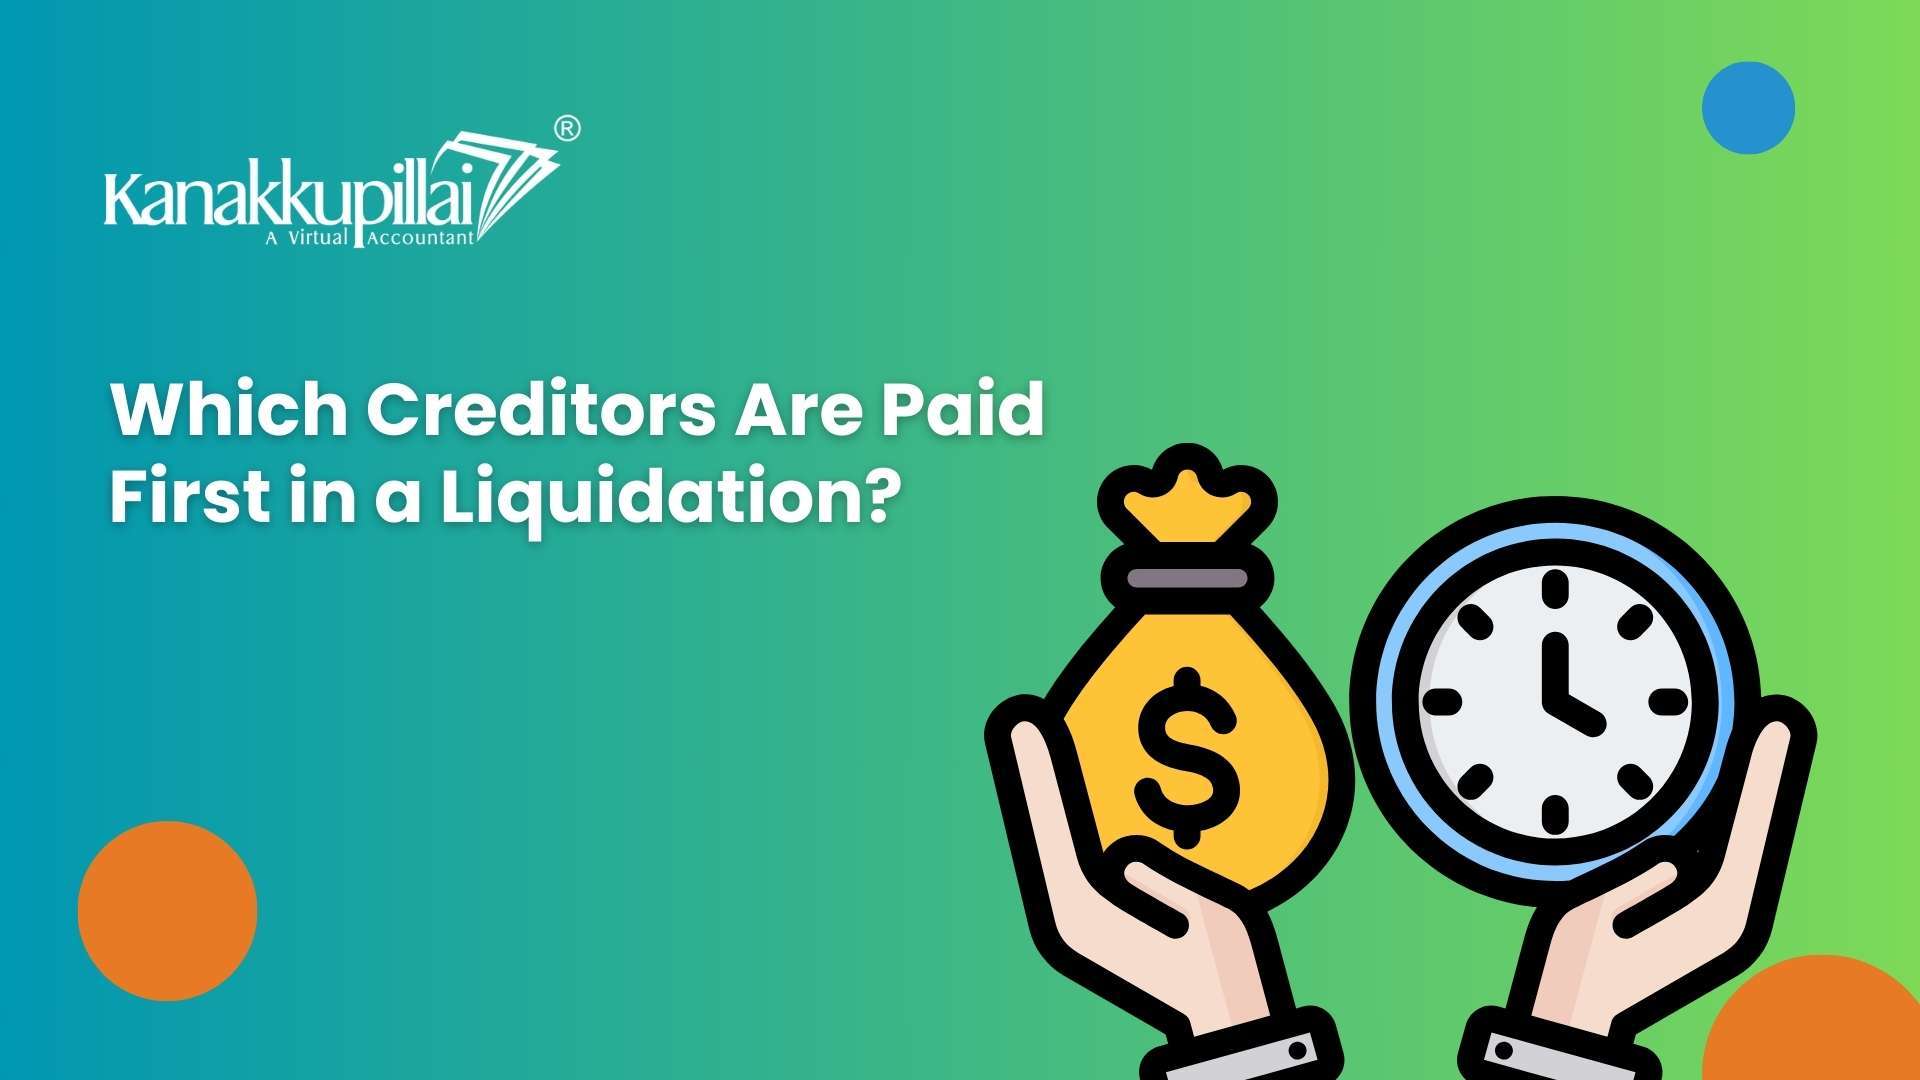 You are currently viewing Which Creditors Are Paid First in a Liquidation?